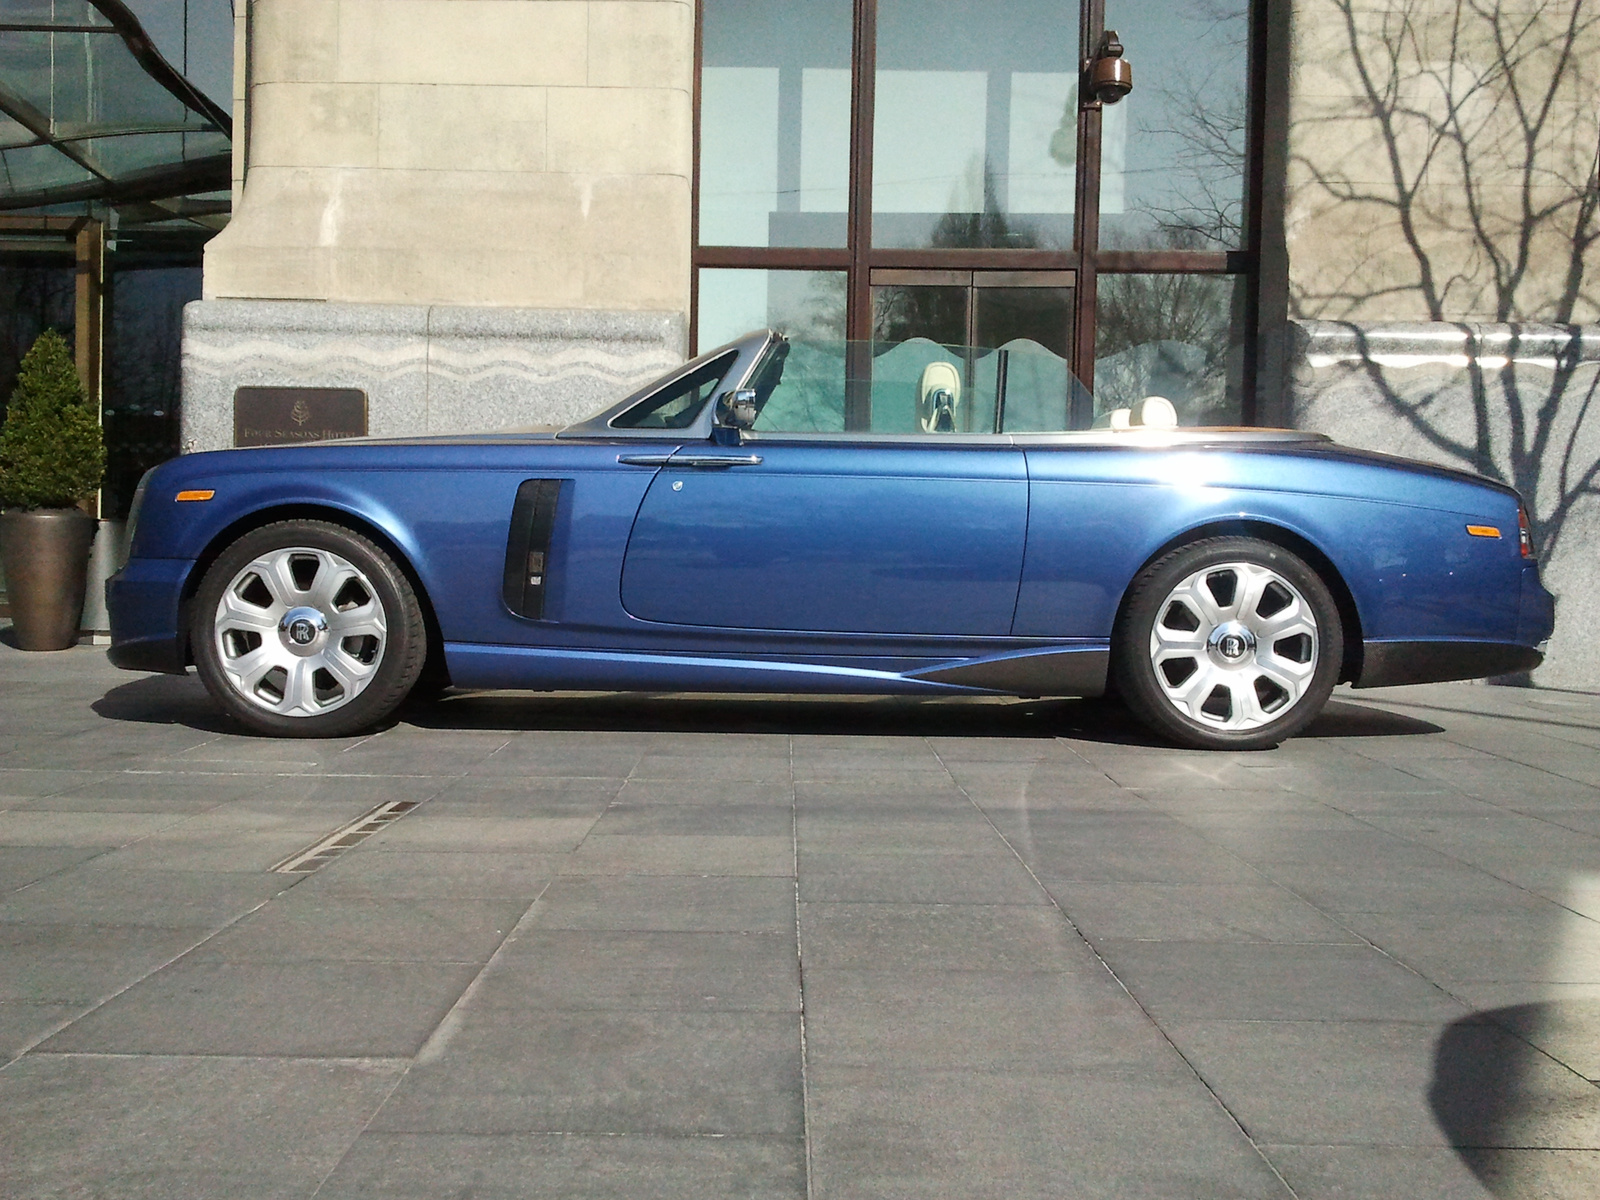 Mansory Bel Air (Rolls Royce Drophead Coupe)